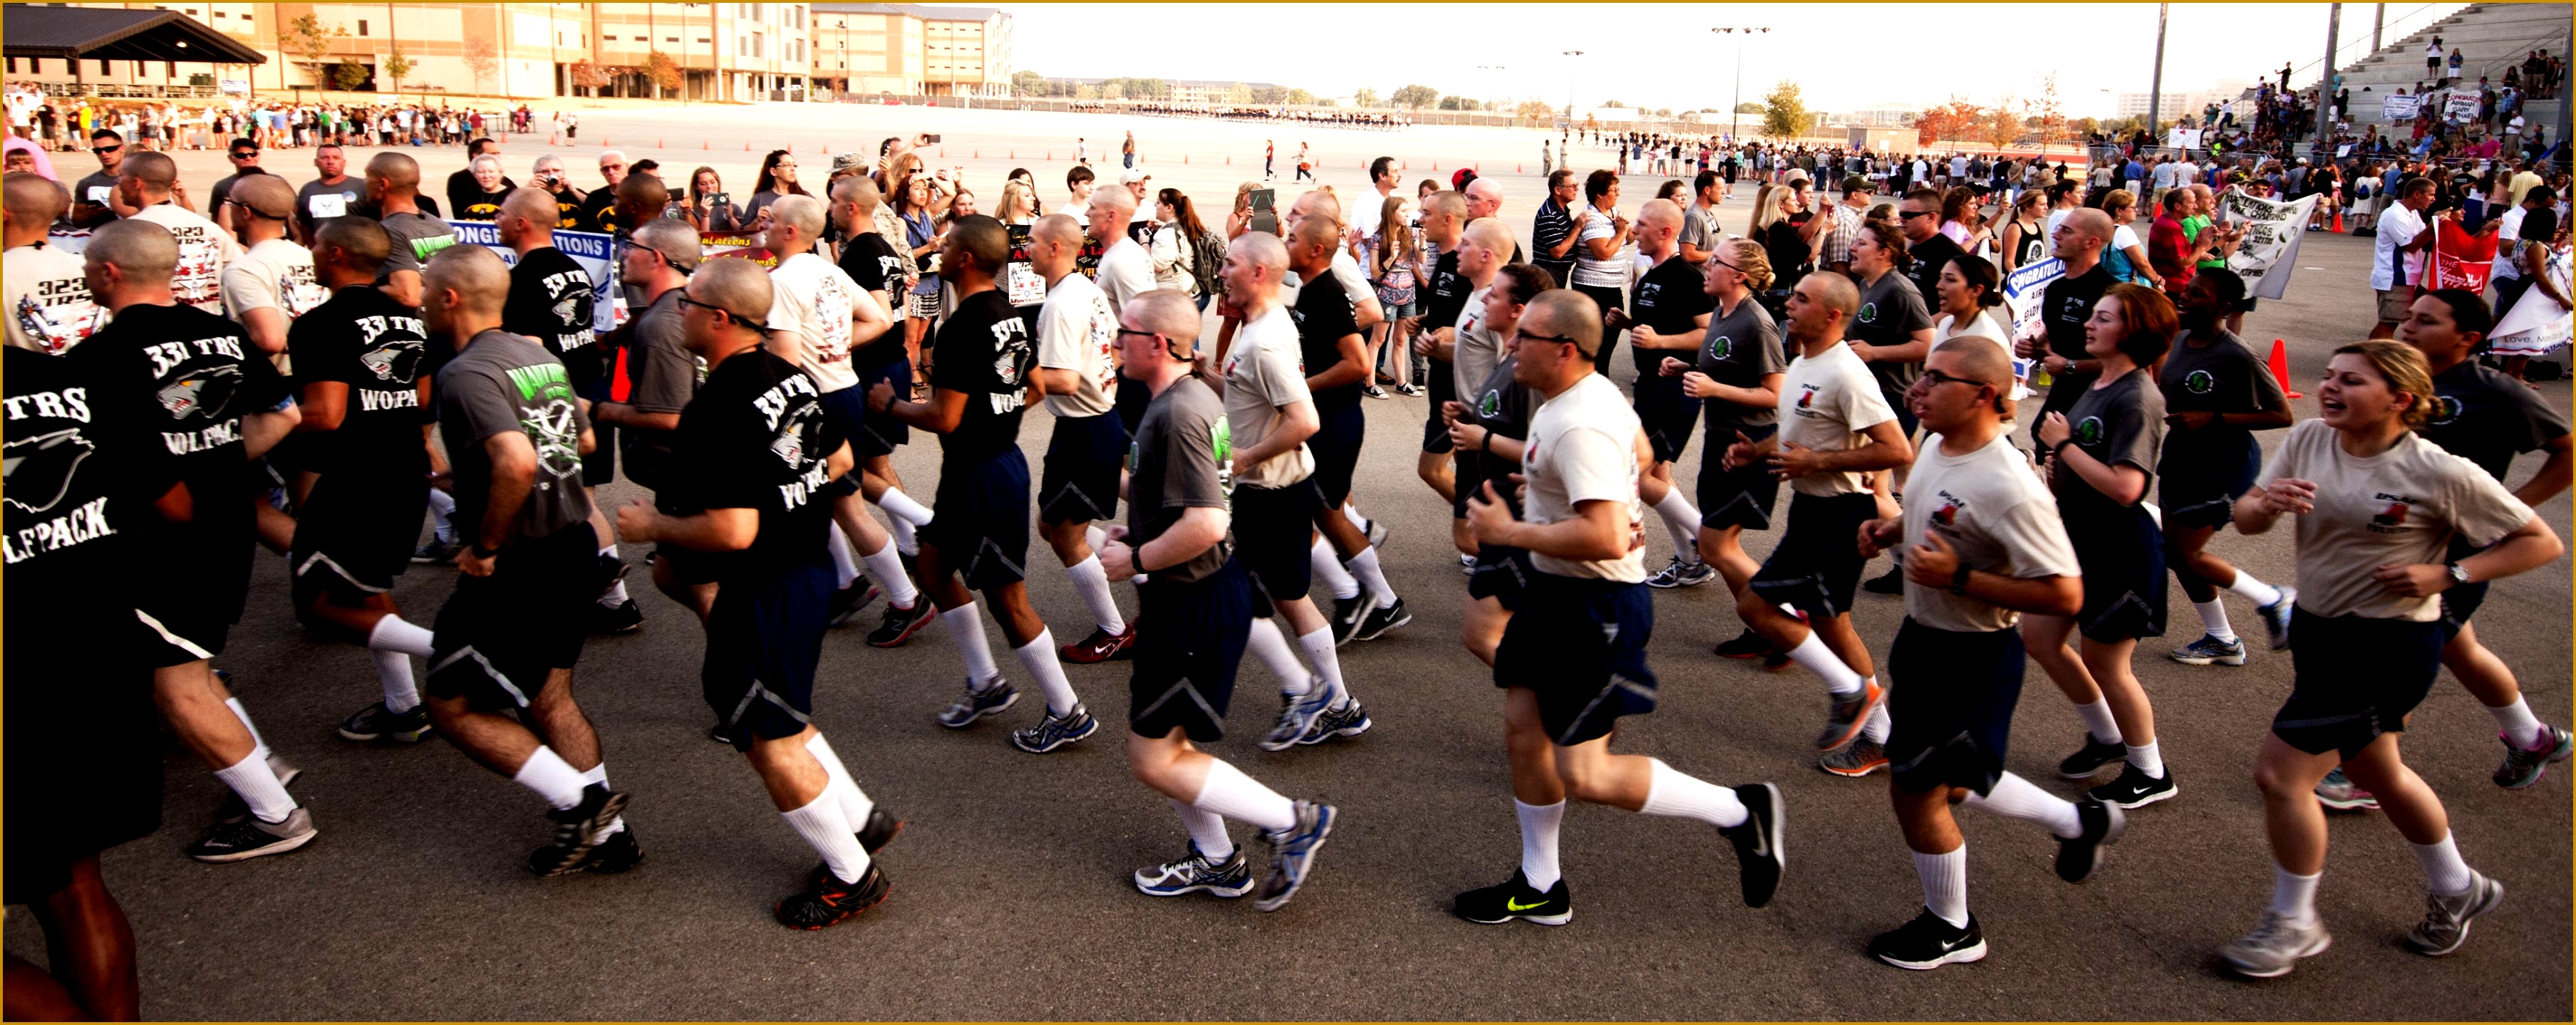 running in formation at air force bmt graduation 5a9043fa1d 14393615